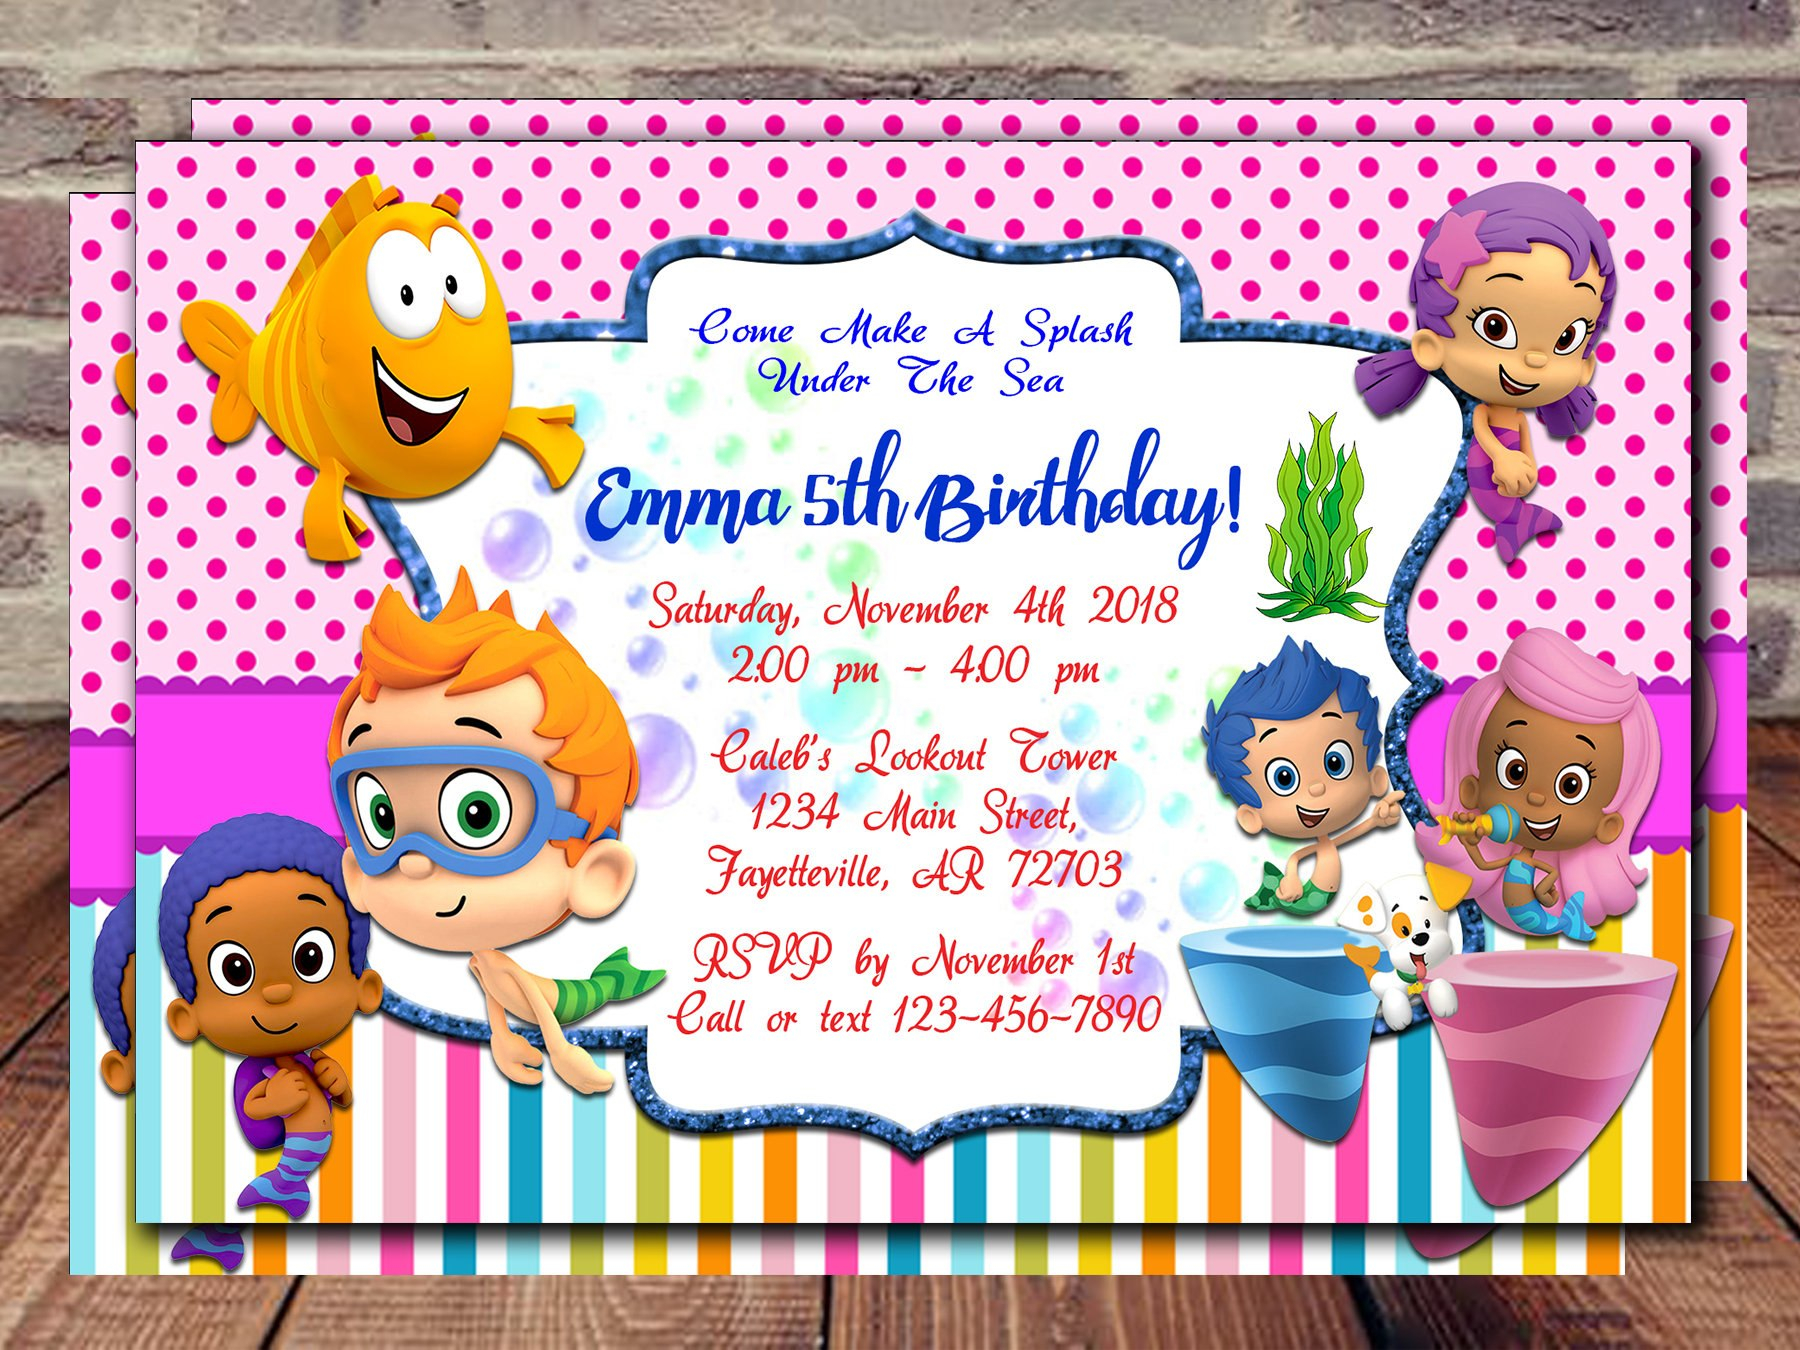 Tips Pretty Bubble Guppies Invitations Design For Your Party Ideas throughout Bubble Guppies Birthday Banner Template